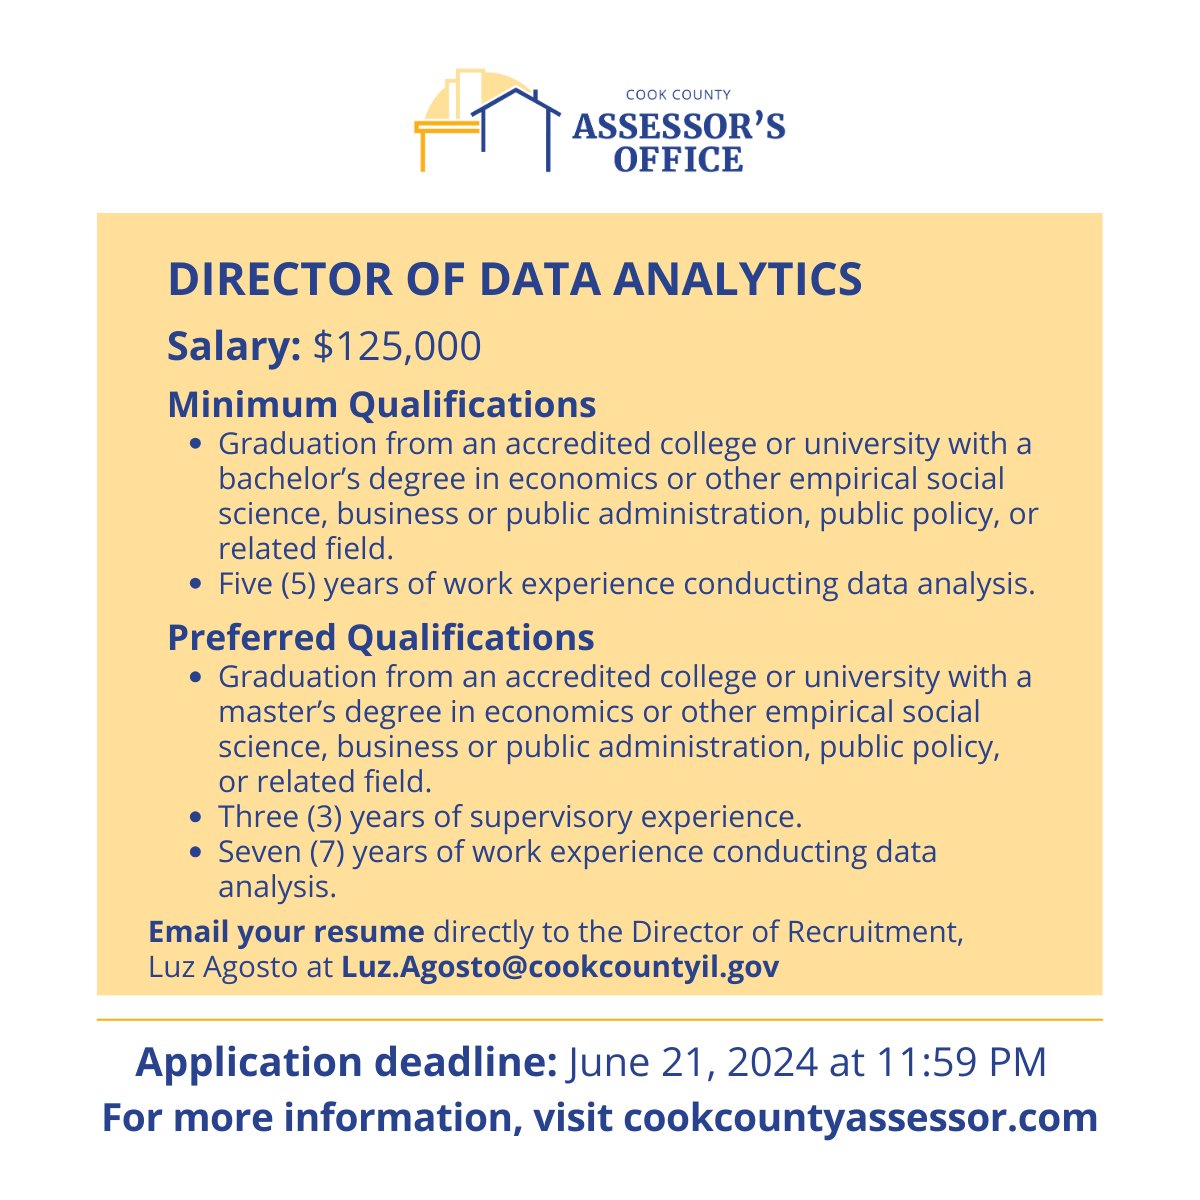 We are hiring a Director of Data Analytics. 💻📊 Visit our website for the full job description: cookcountyassessor.com/job-opportunit… Email resume to Luz.Agosto@cookcountyil.gov